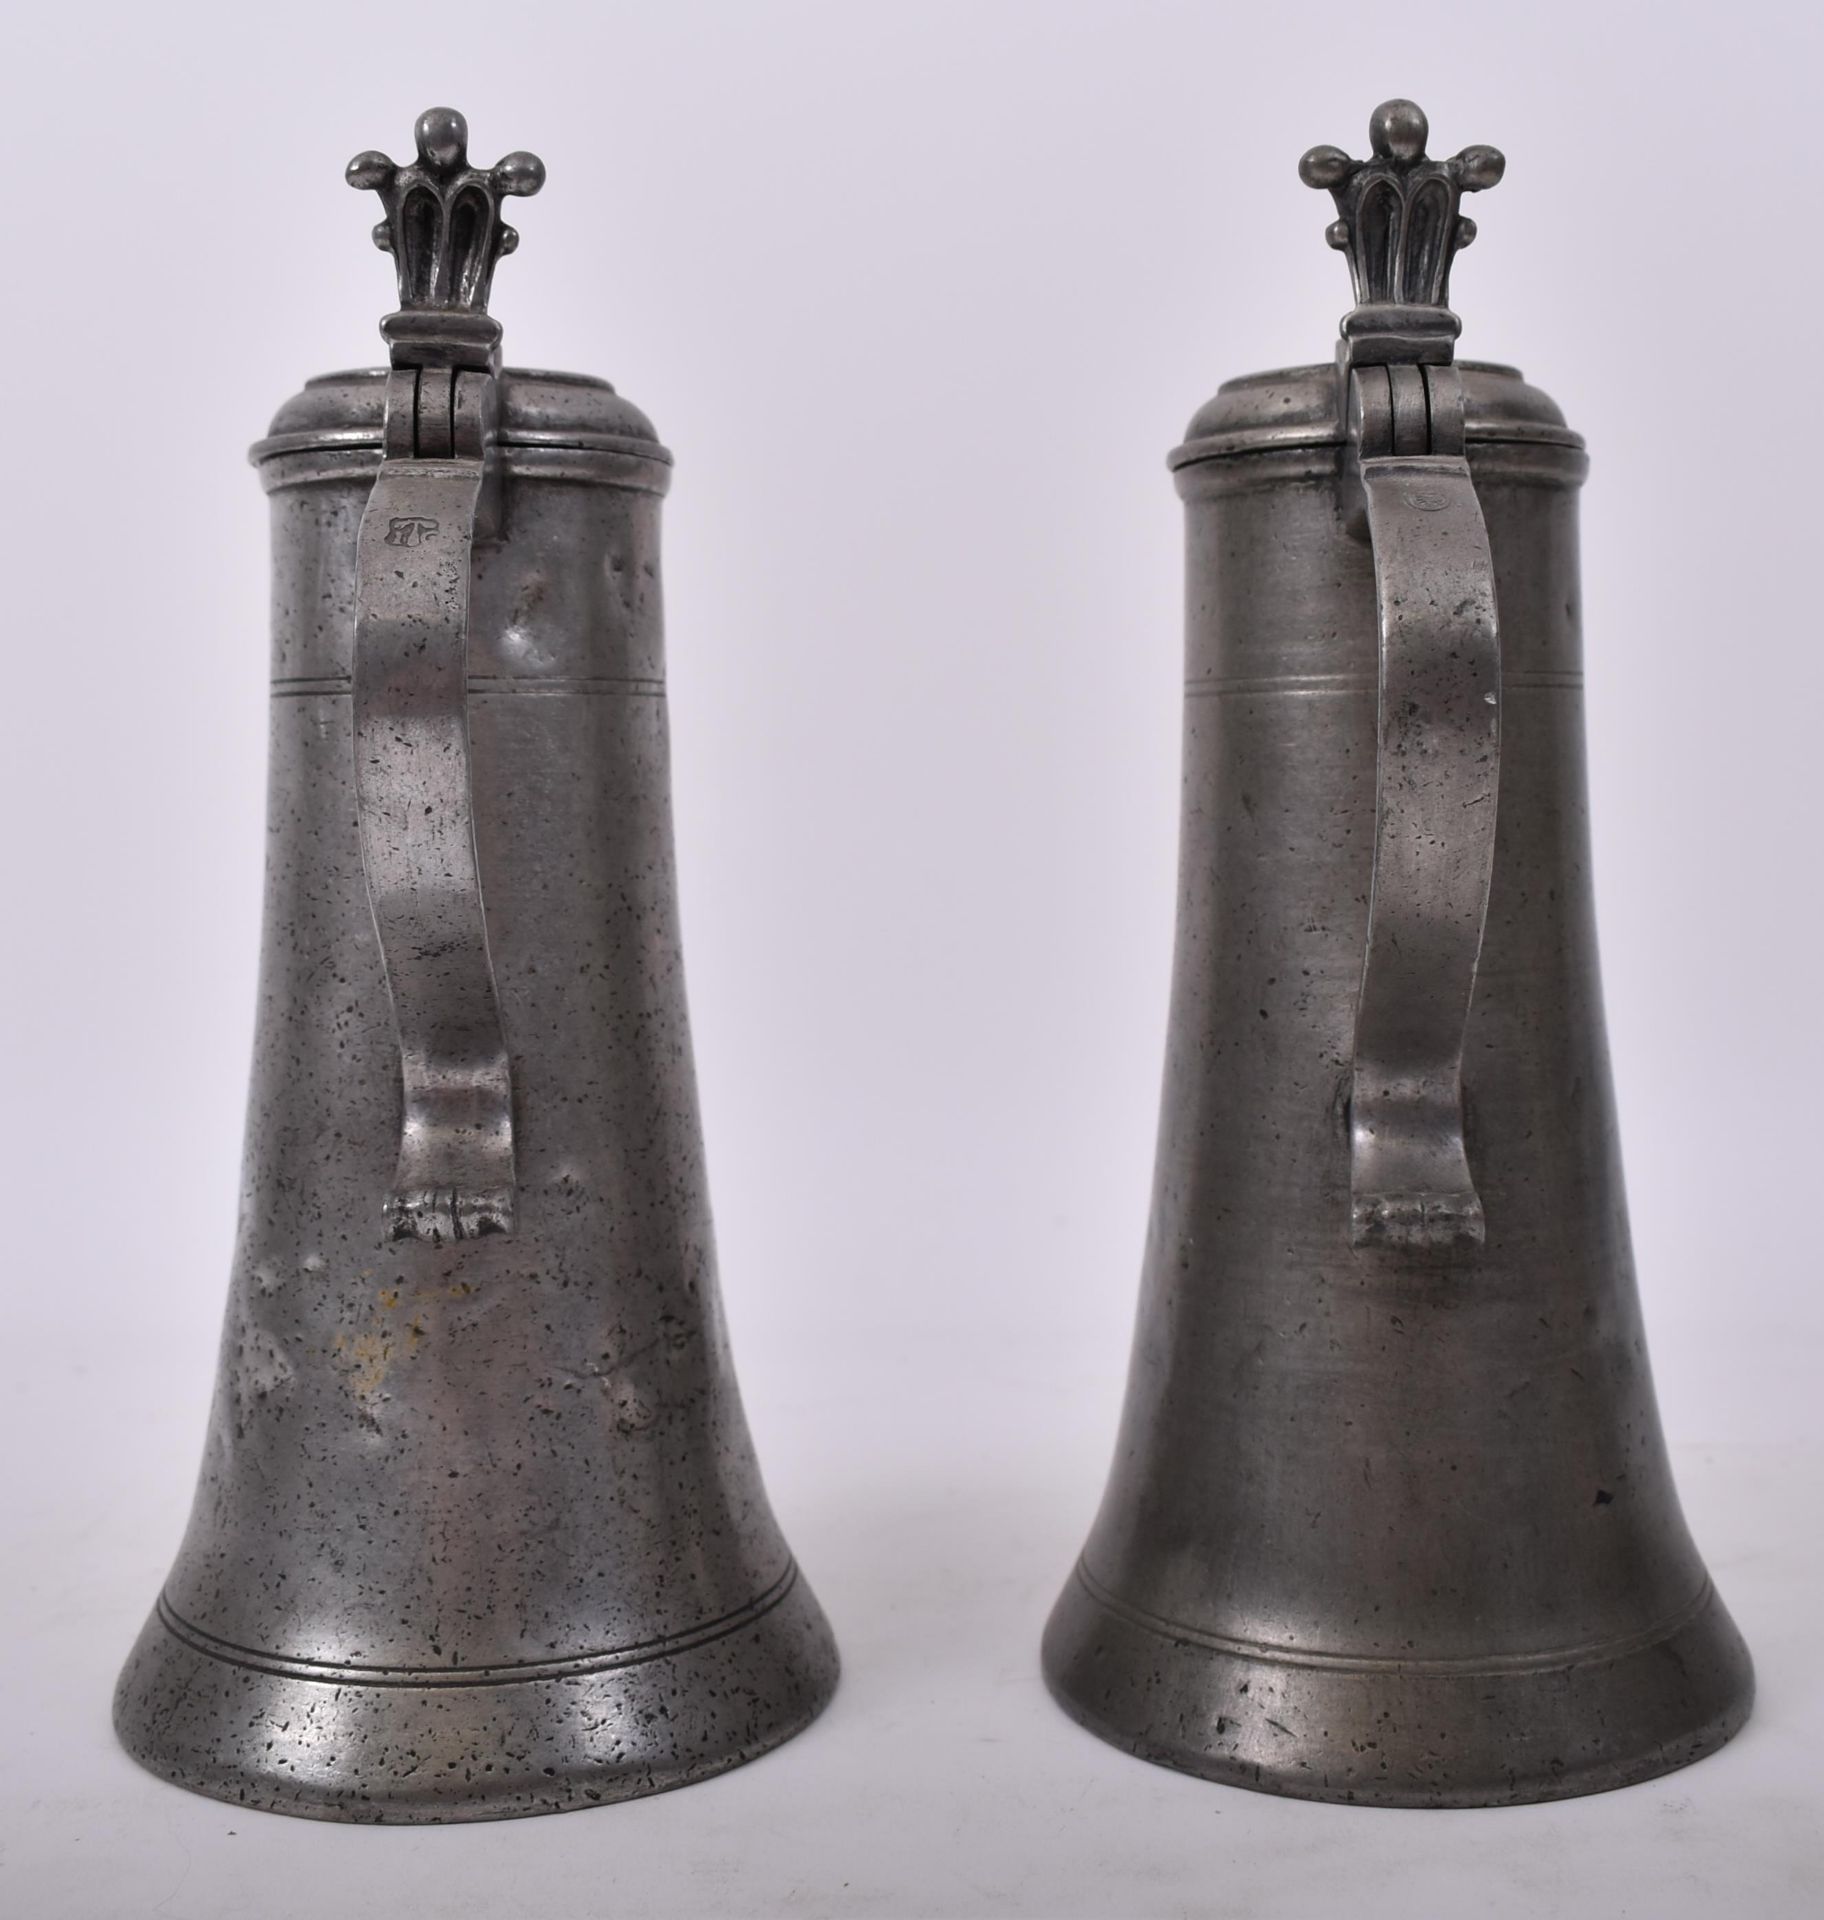 PAIR OF EARLY 18TH CENTURY 1730 SWISS BEARDED MAN FLAGONS - Image 4 of 7